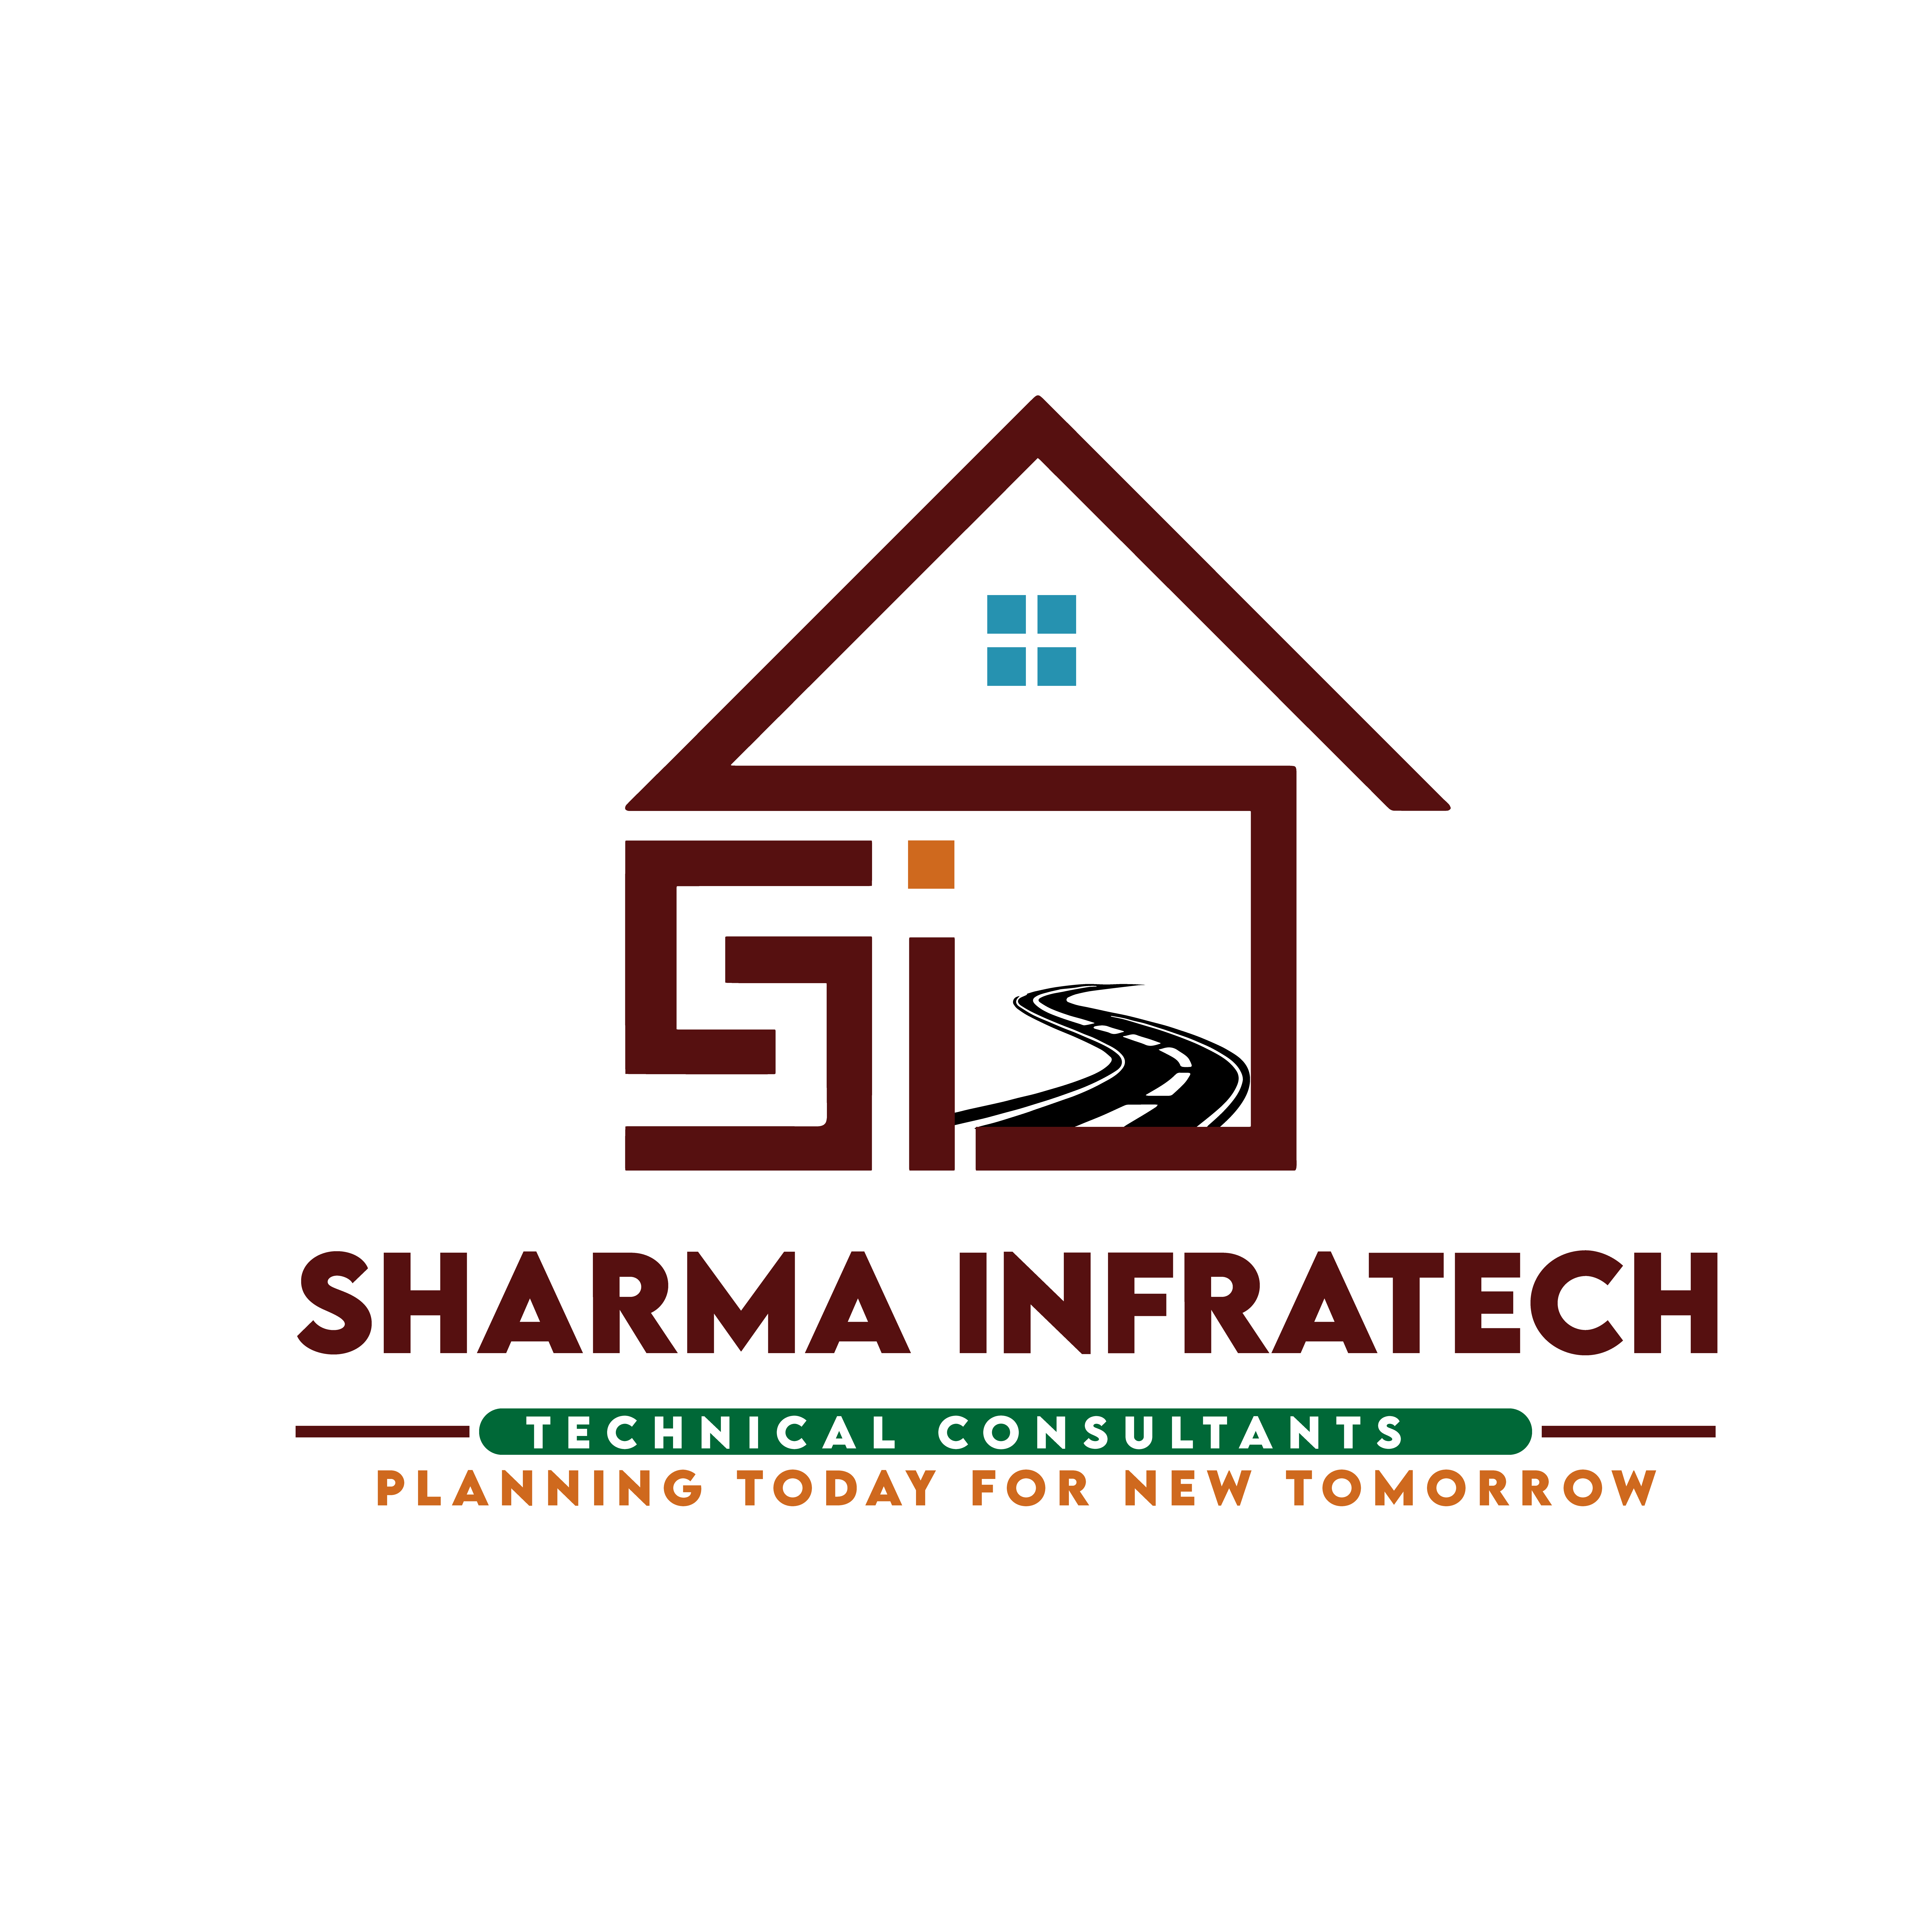 Sharma Infratech -Technical Consultants for obtaining access permissions to all kind of residential / commercial / private properties along road side in the state of Himachal Pradesh.